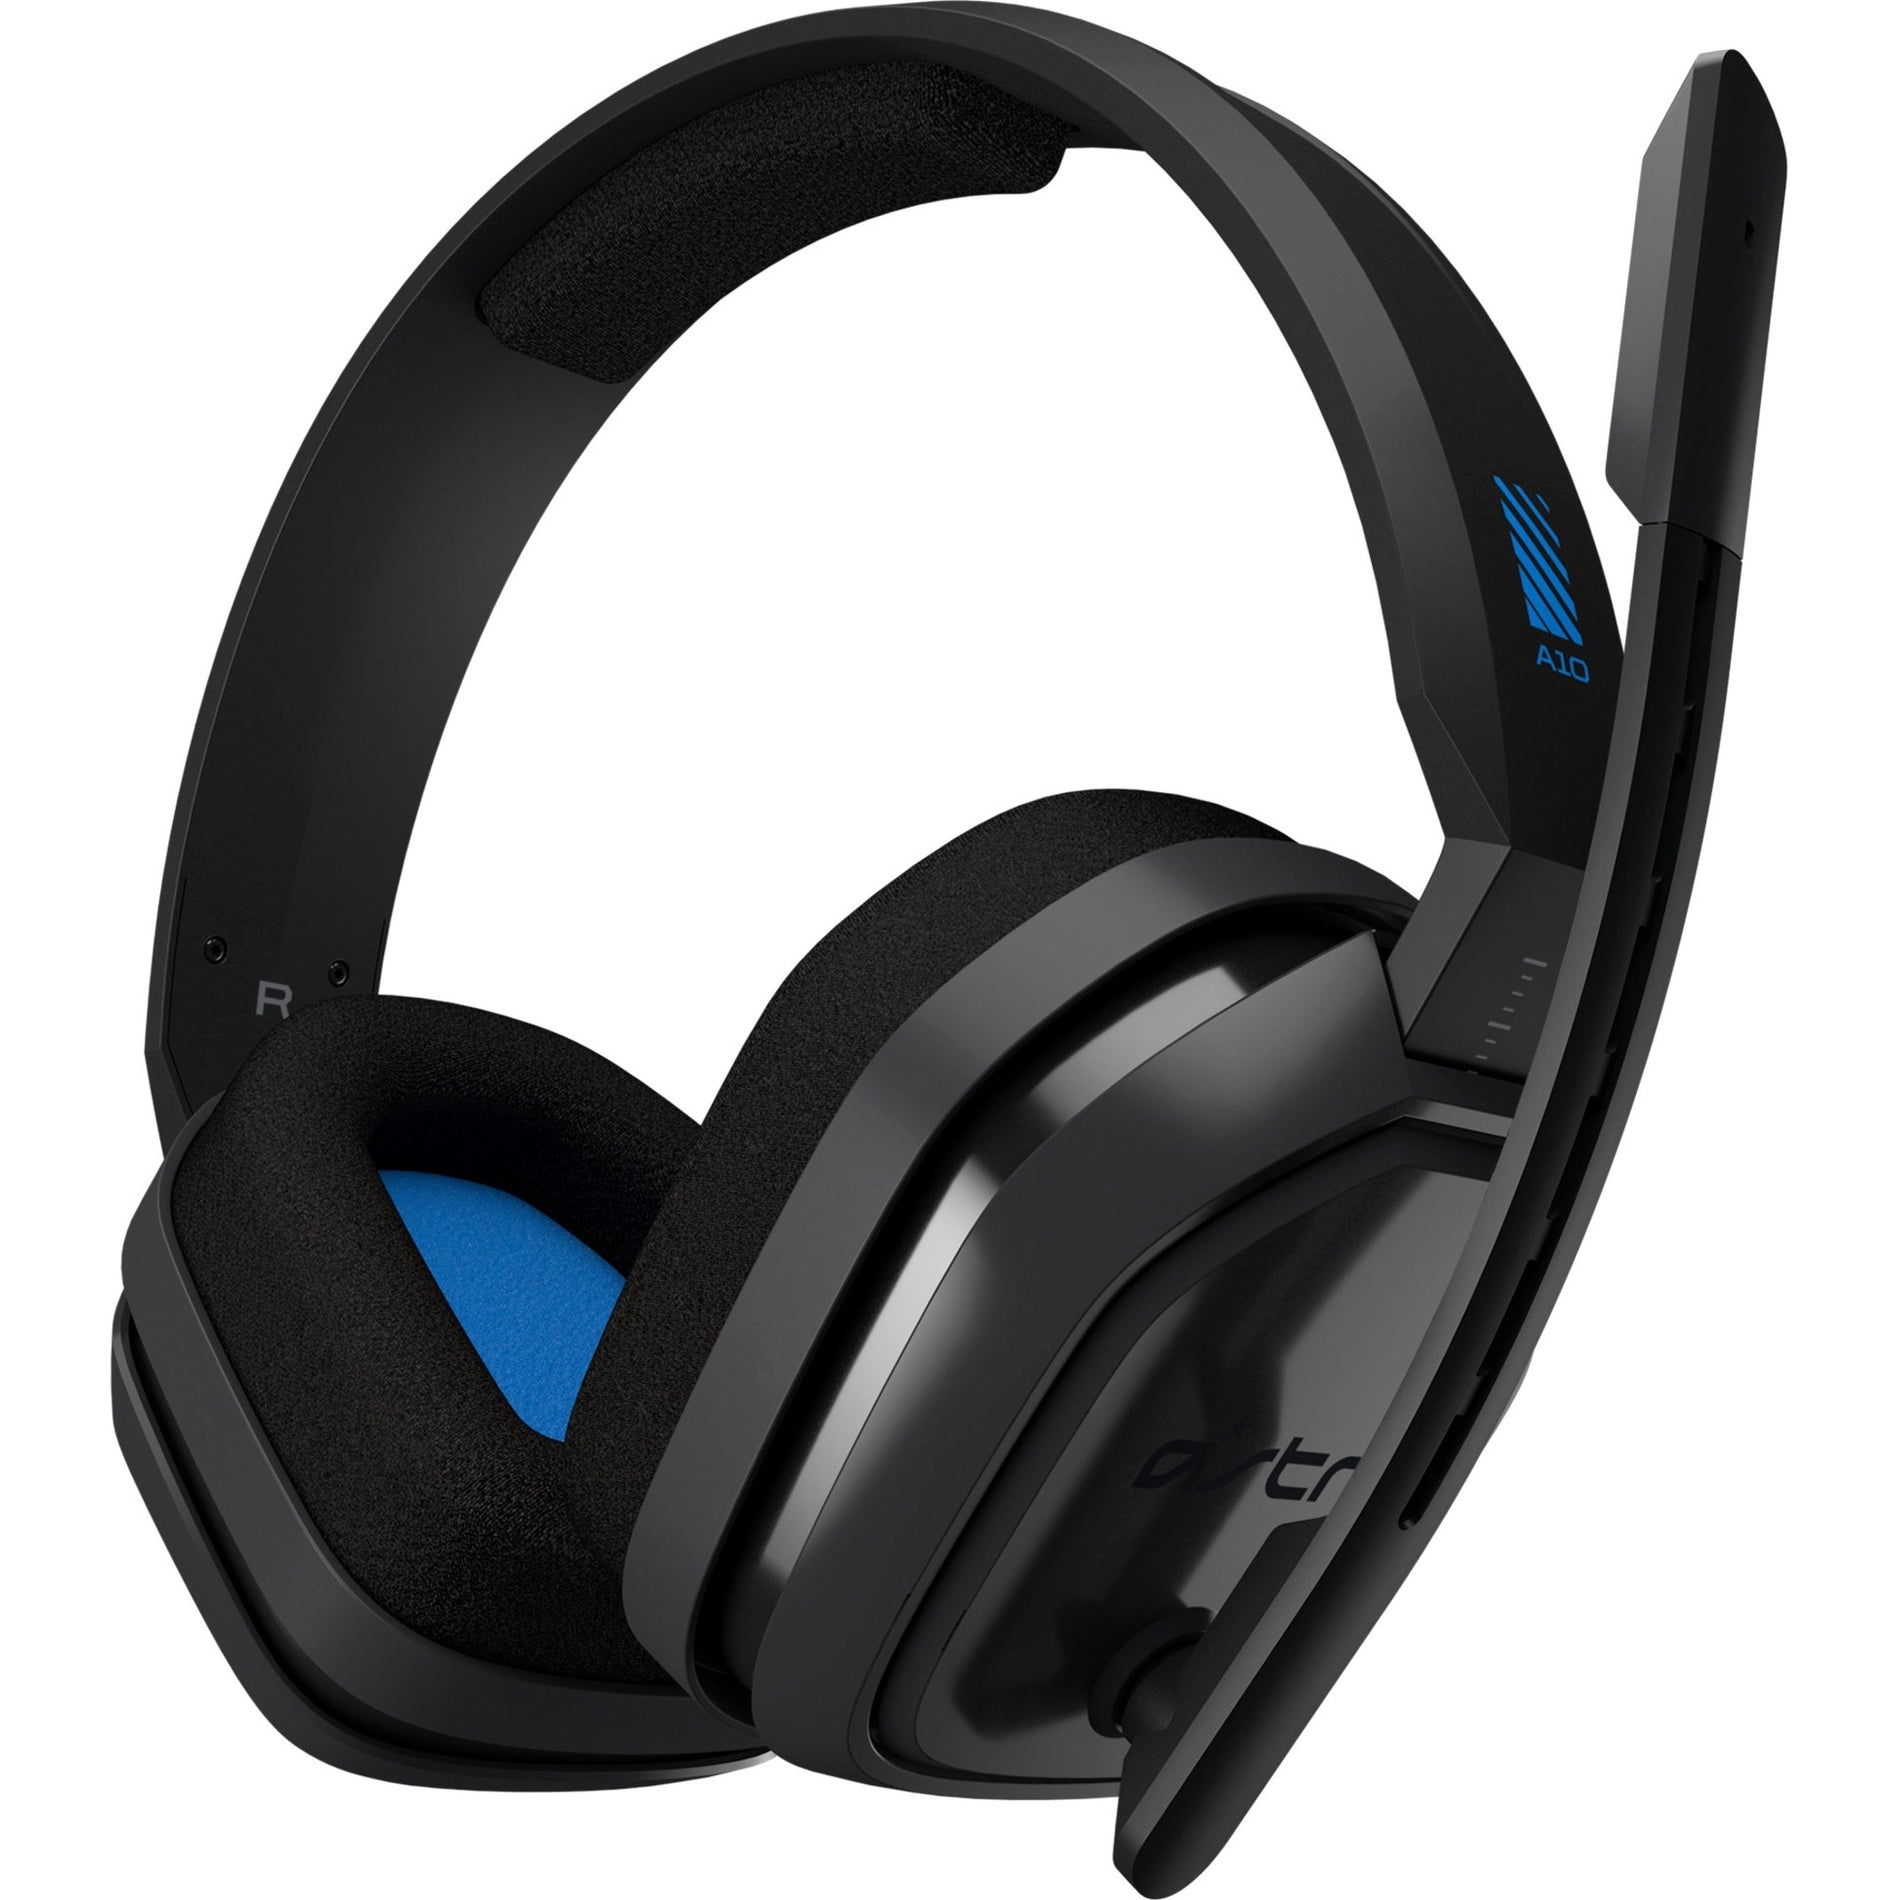 Astro A10 Headset - Over-the-ear, Over-the-head, Binaural, Wired [Discontinued]